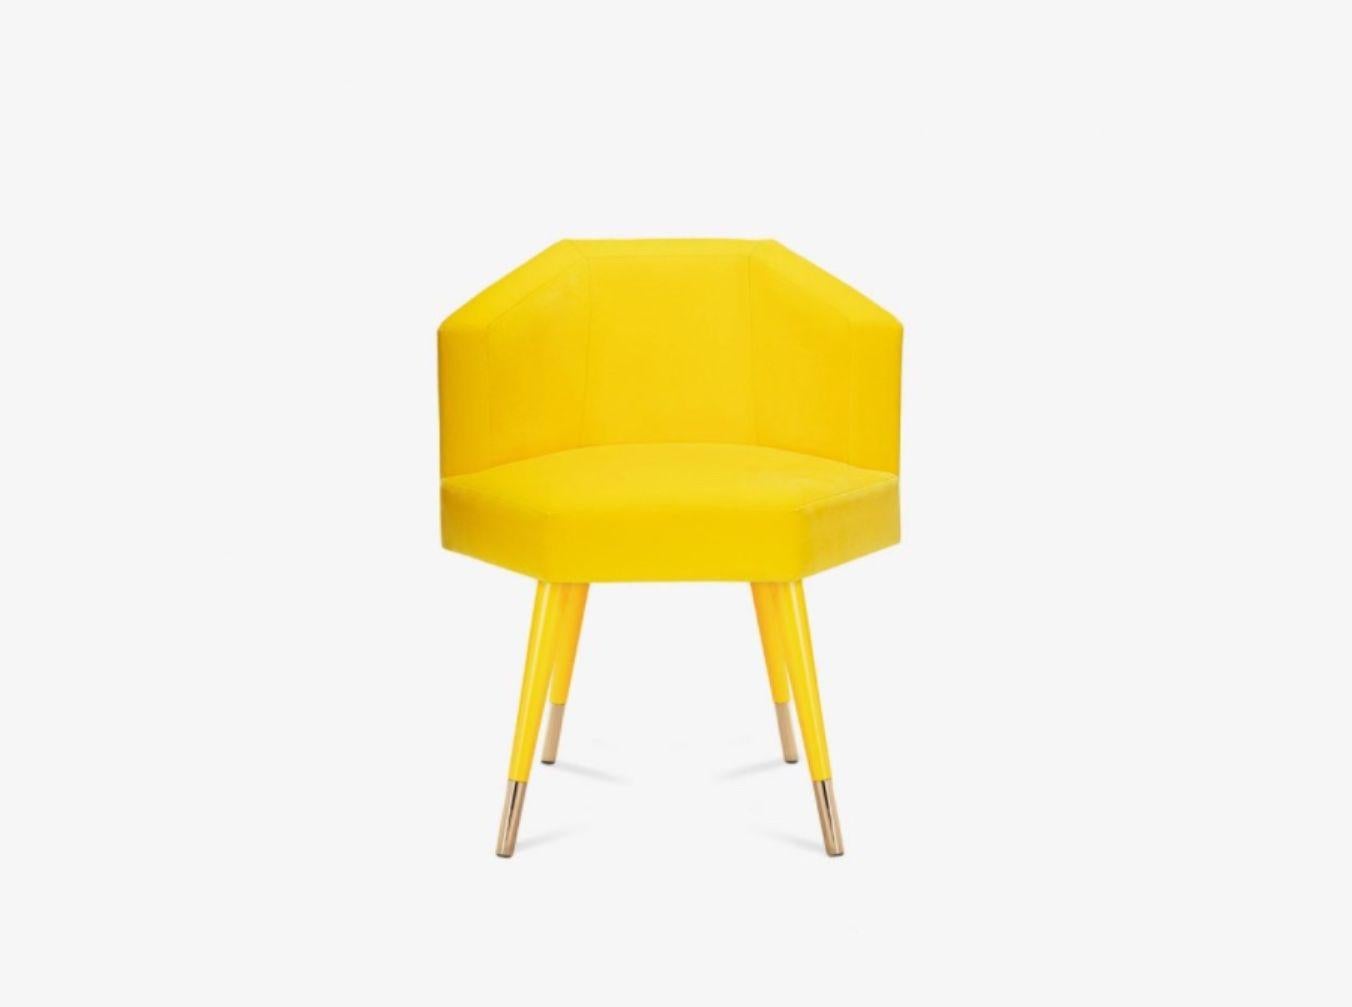 Beelicious dining chair, Royal Stranger
Dimensions: 63 x 55 x 68 cm
Materials: Upholstery Lemongrass cotton velvet, Lemongrass lacquered wood with a glossy finish. Feet covers Polished Brass.


Hexagonal in shape, the Beelicious chair is a